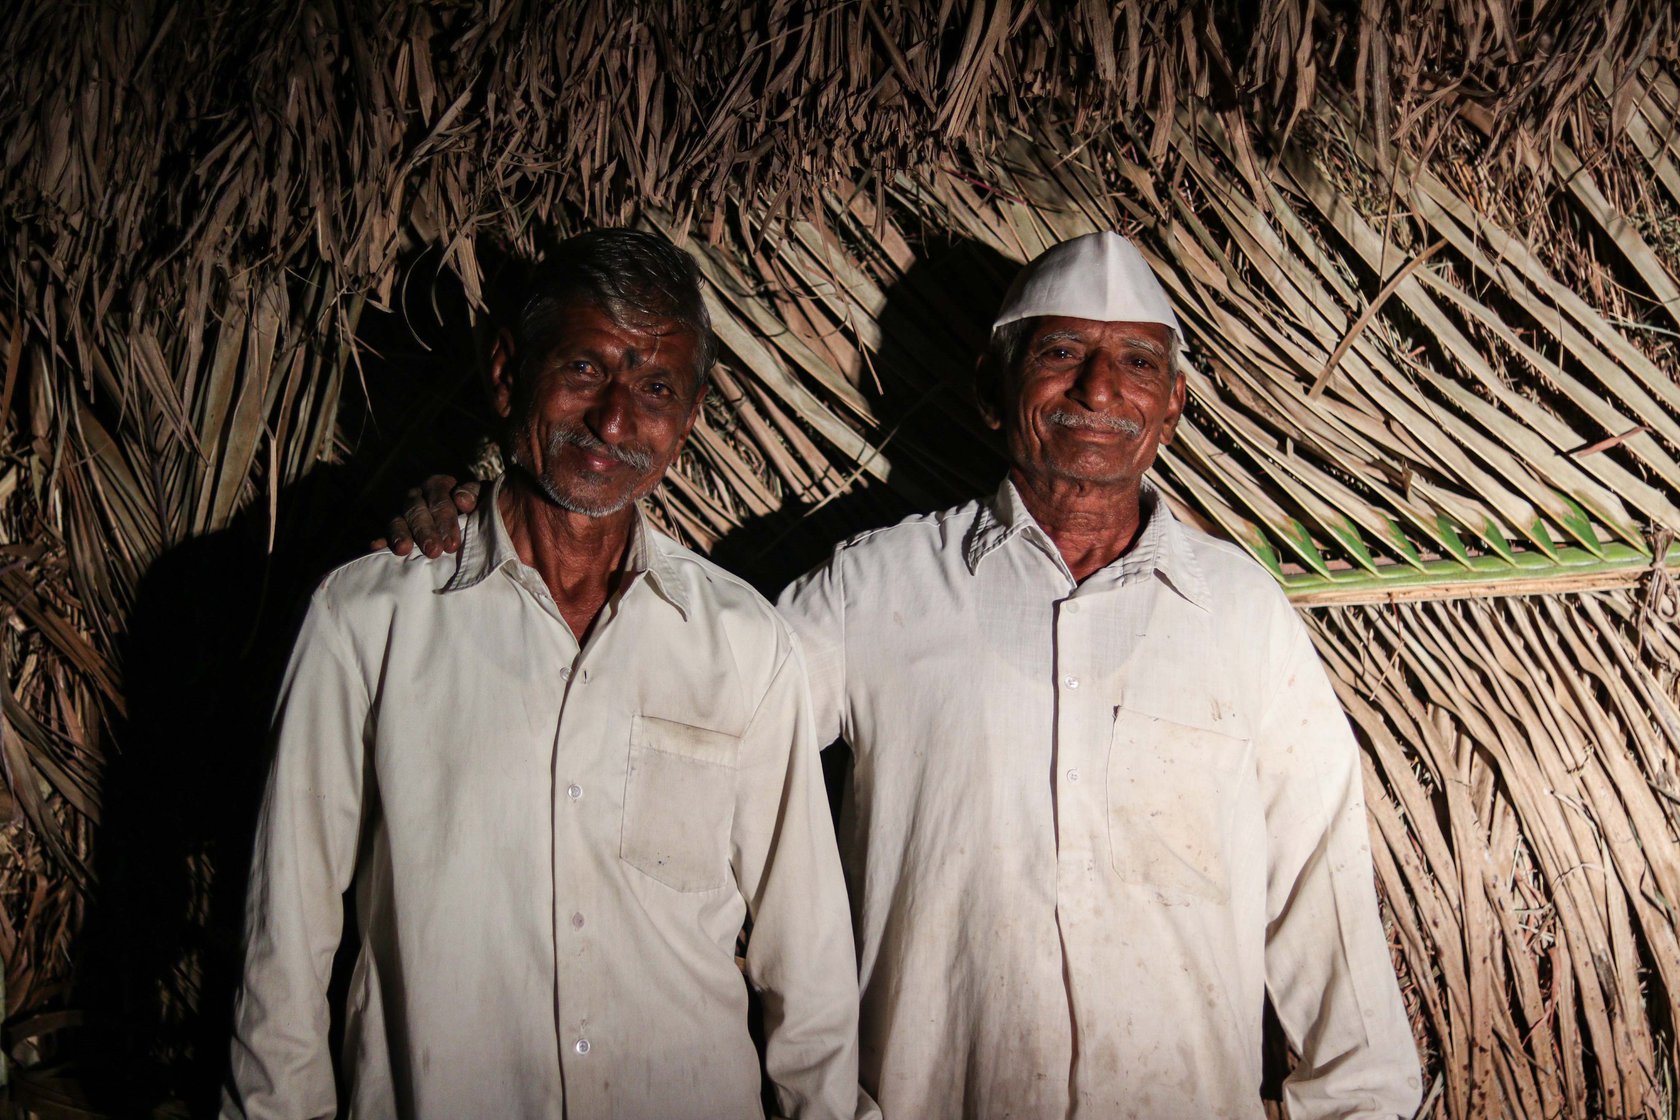 Vishnu Bhosale (standing on the left) and Narayan Gaikwad are neighbours and close friends who came together to build a jhopdi